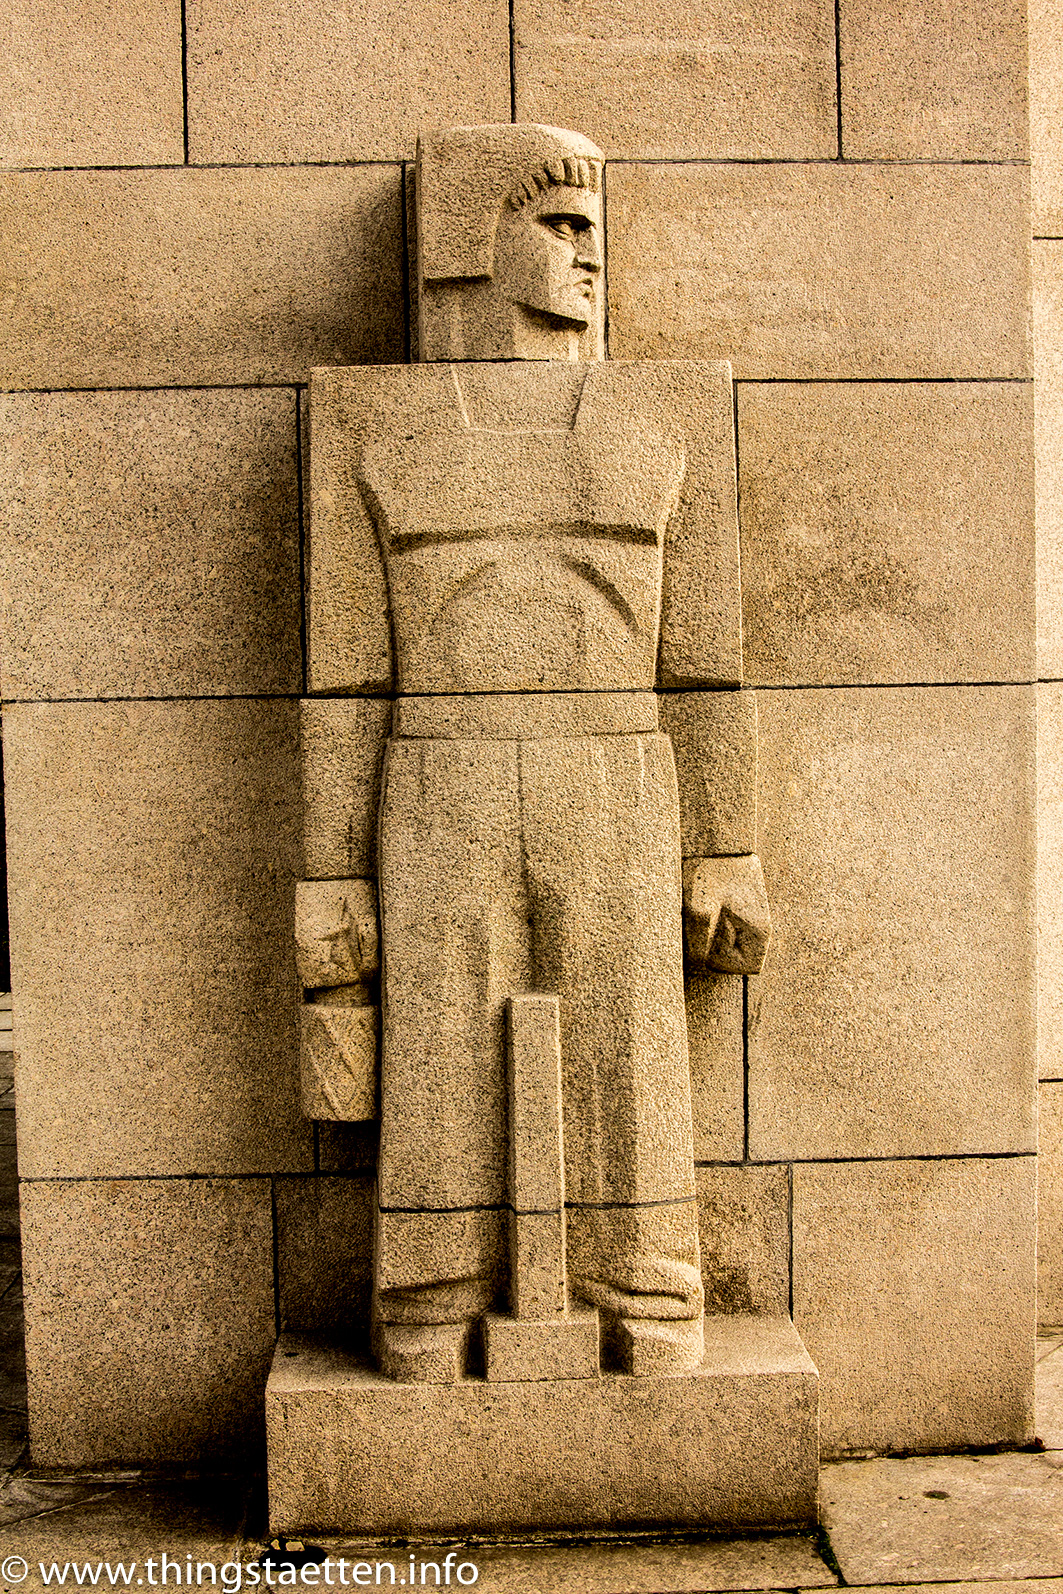 Sculpture made of stone as part of the Nazi memorial - German history of National Socialism